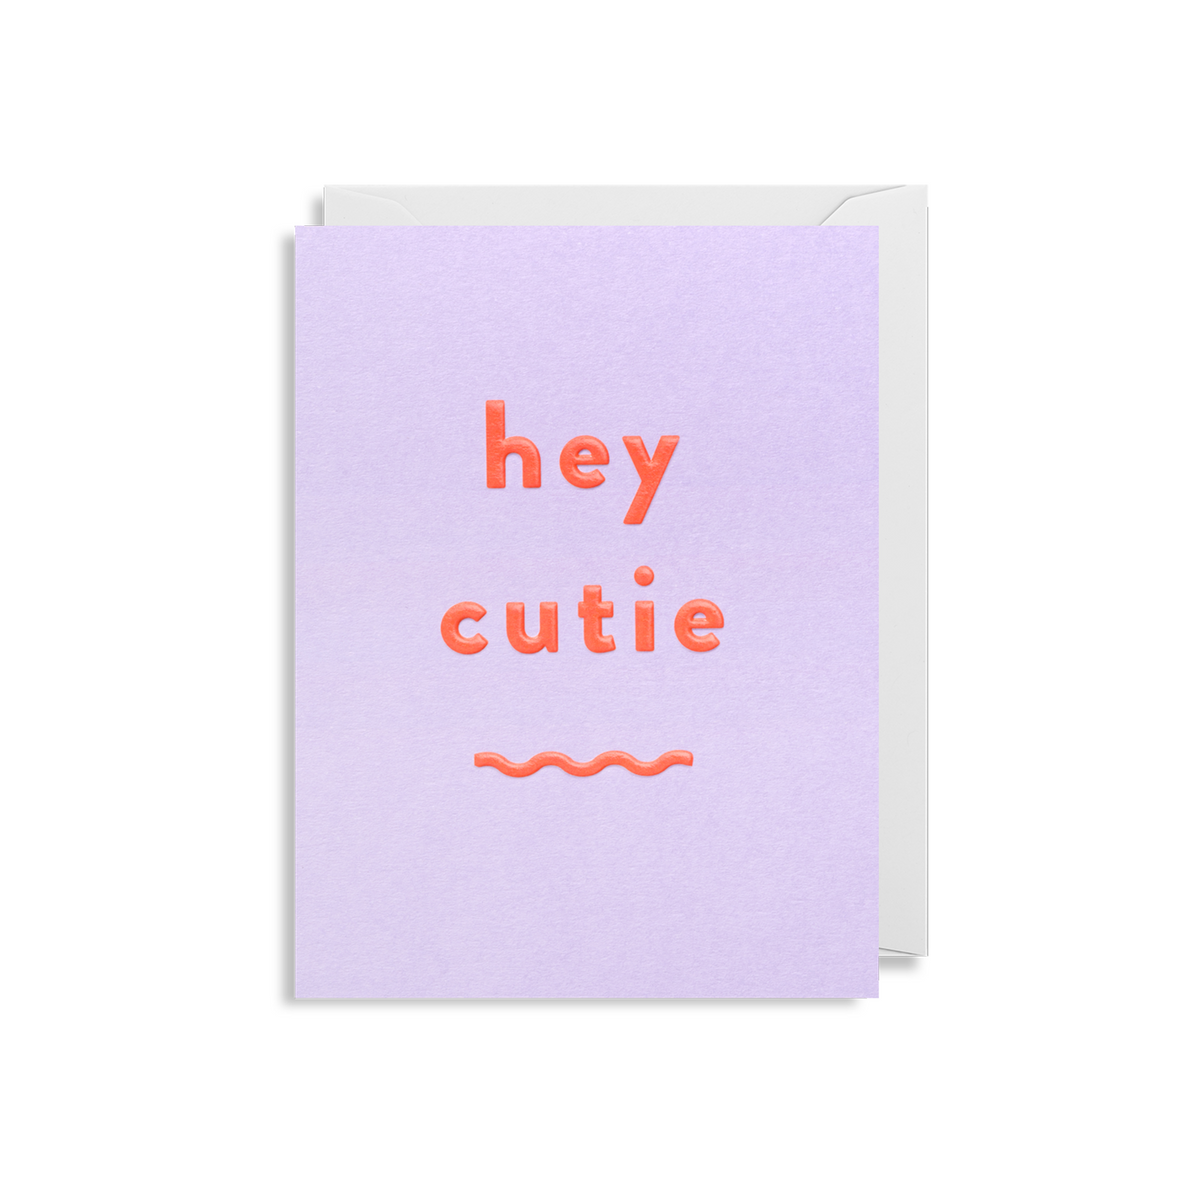 Greeting card with &quot;hey cutie&quot; text, comes with envelope.